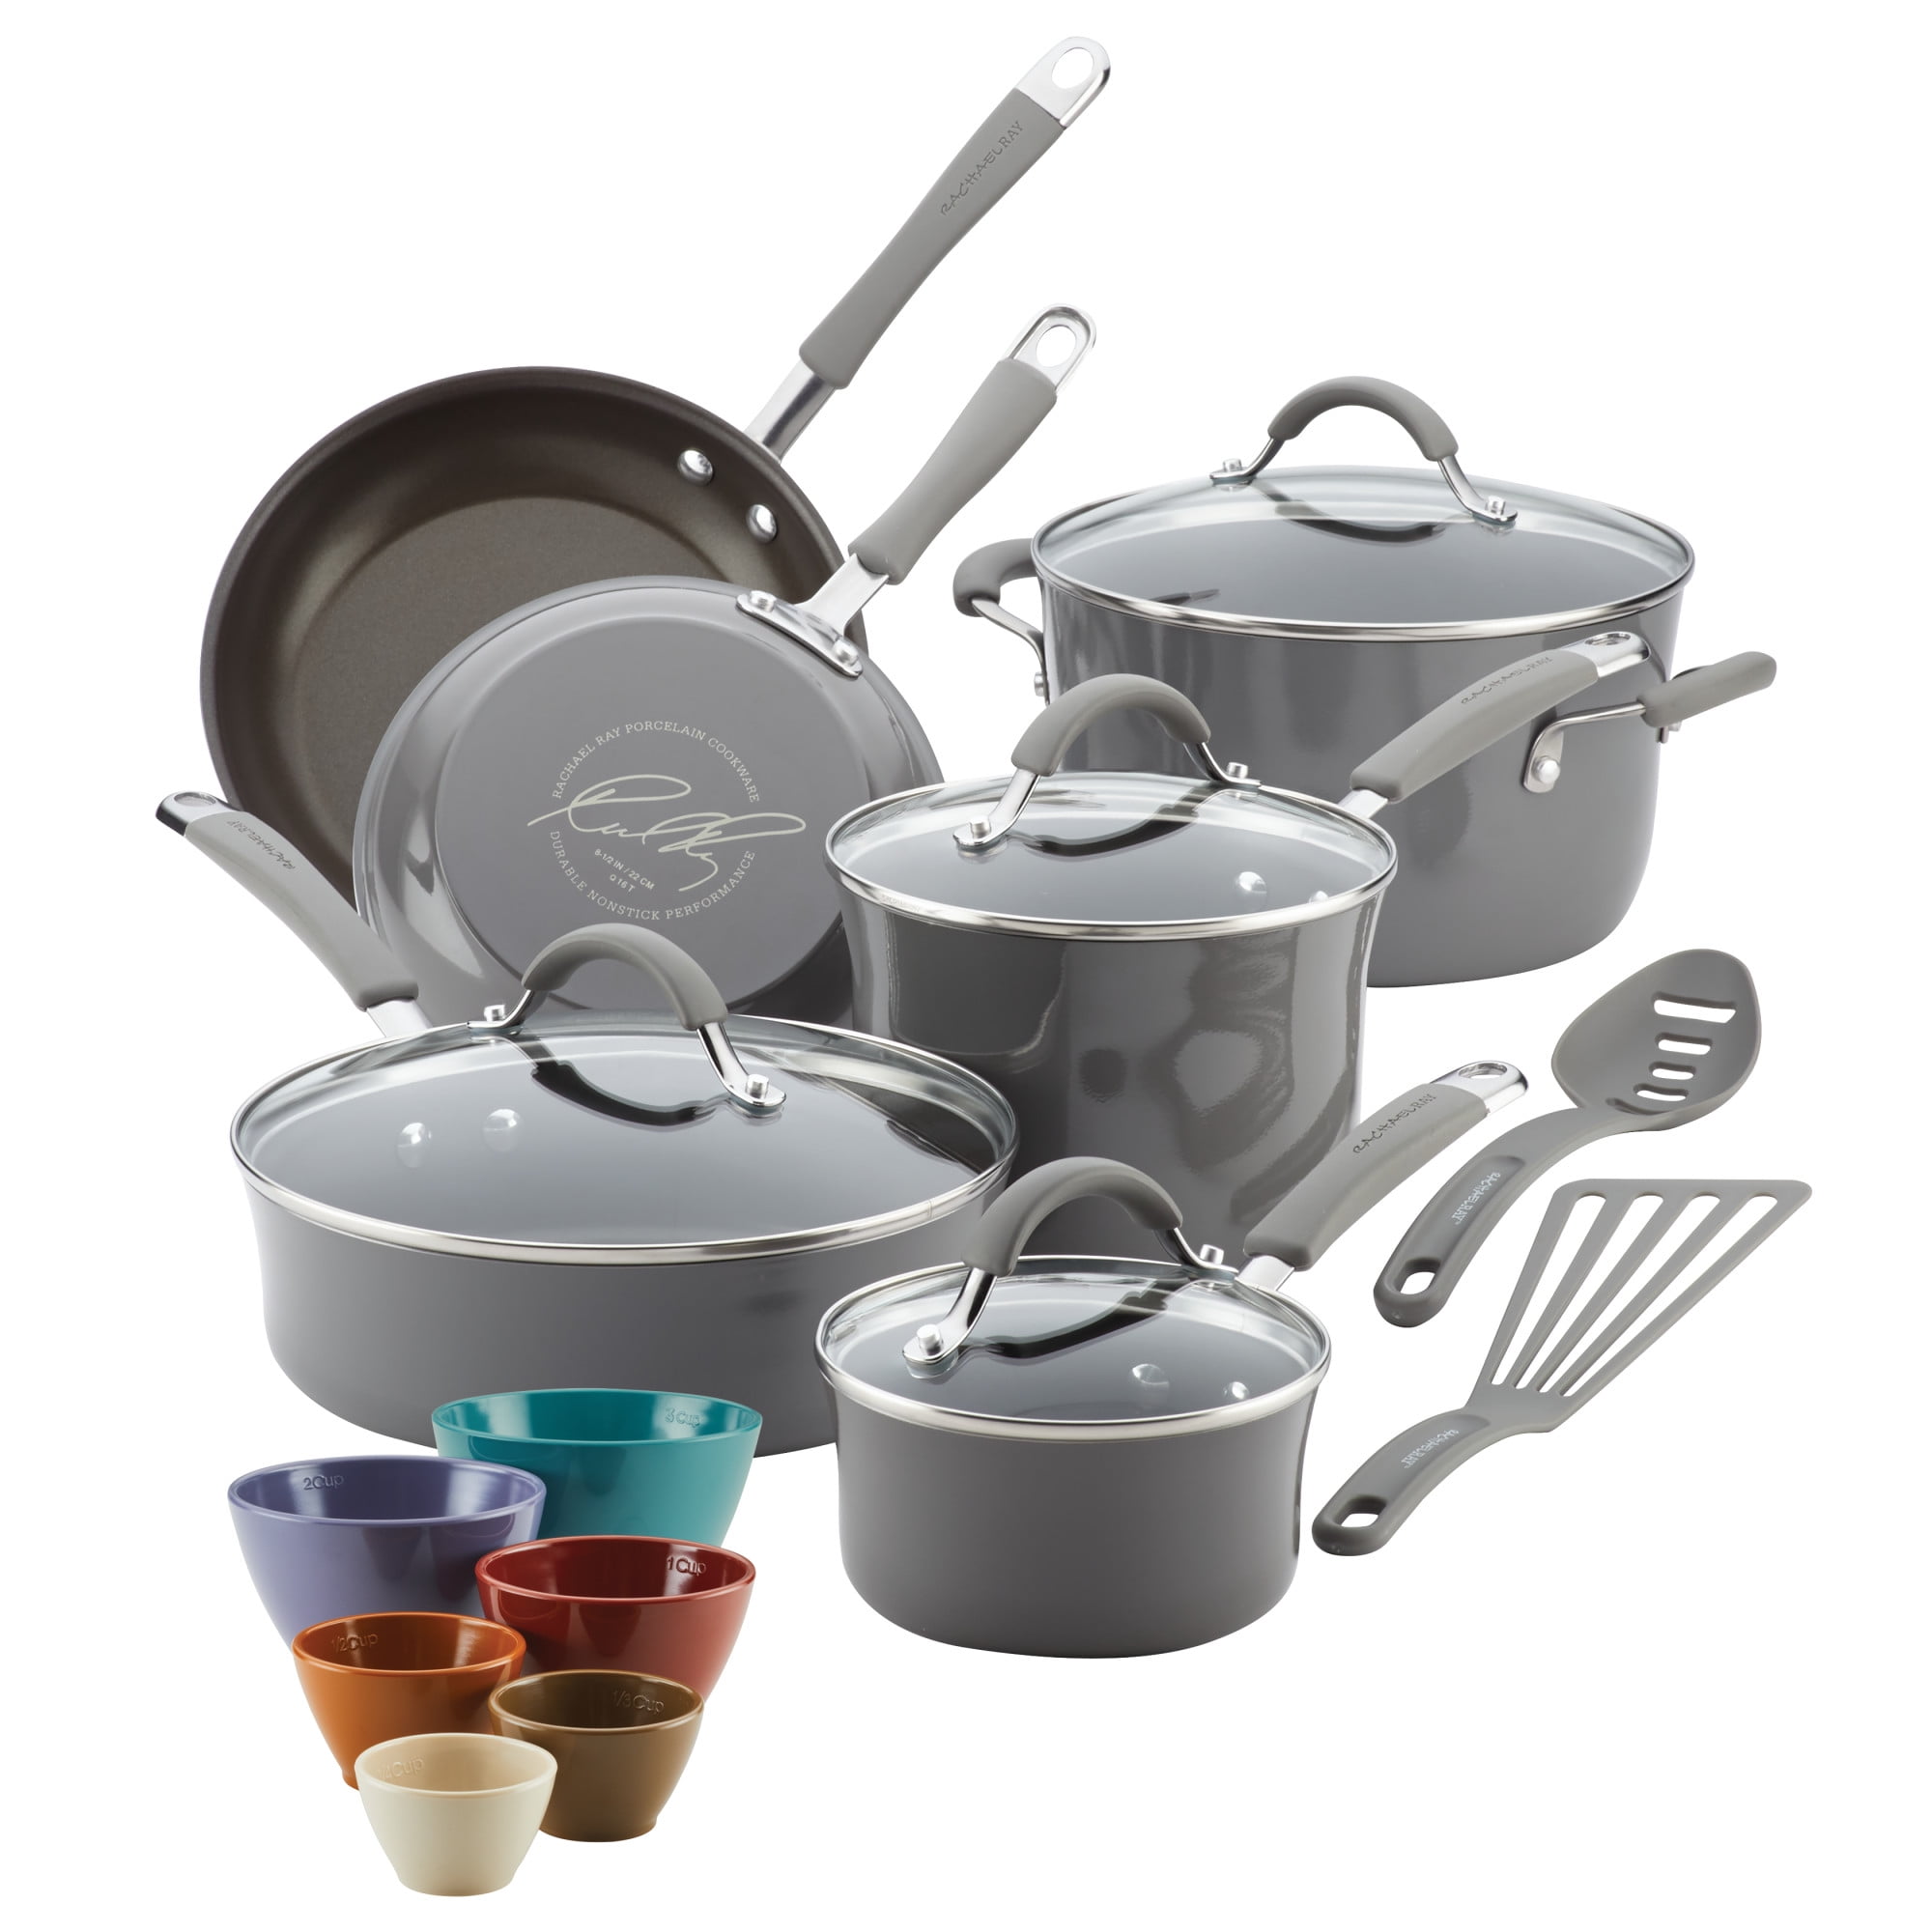 Tupperware 9.8 in Cookware Sets